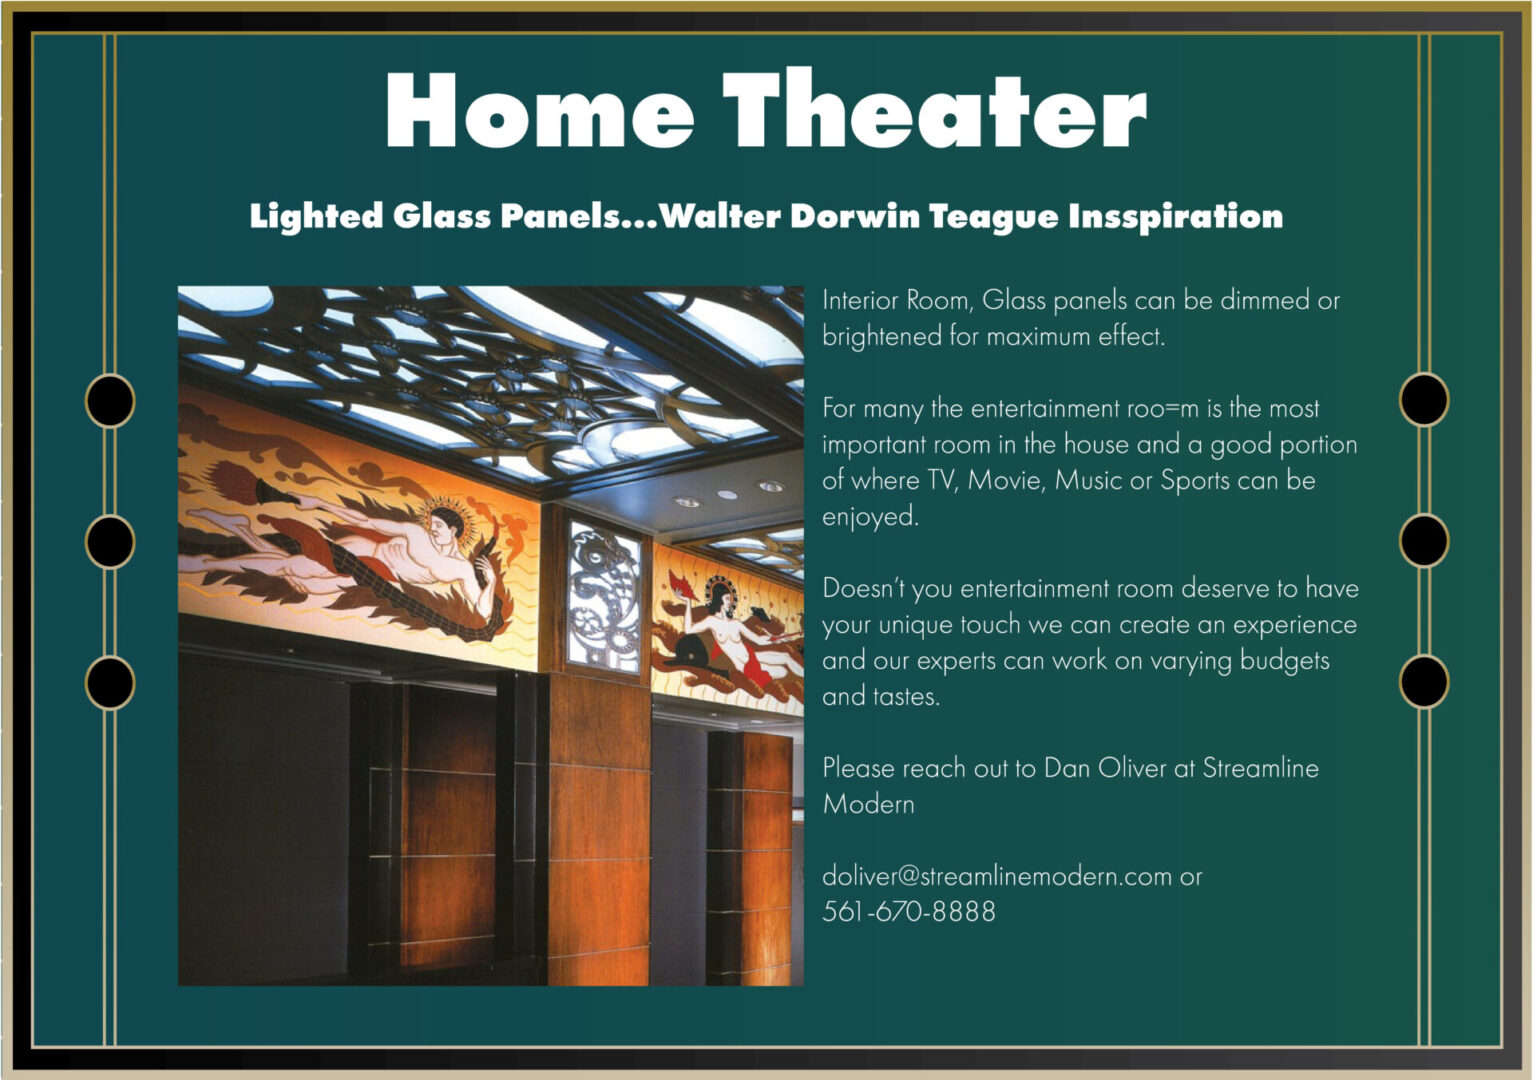 Home Theater with Lighted Glass Panels